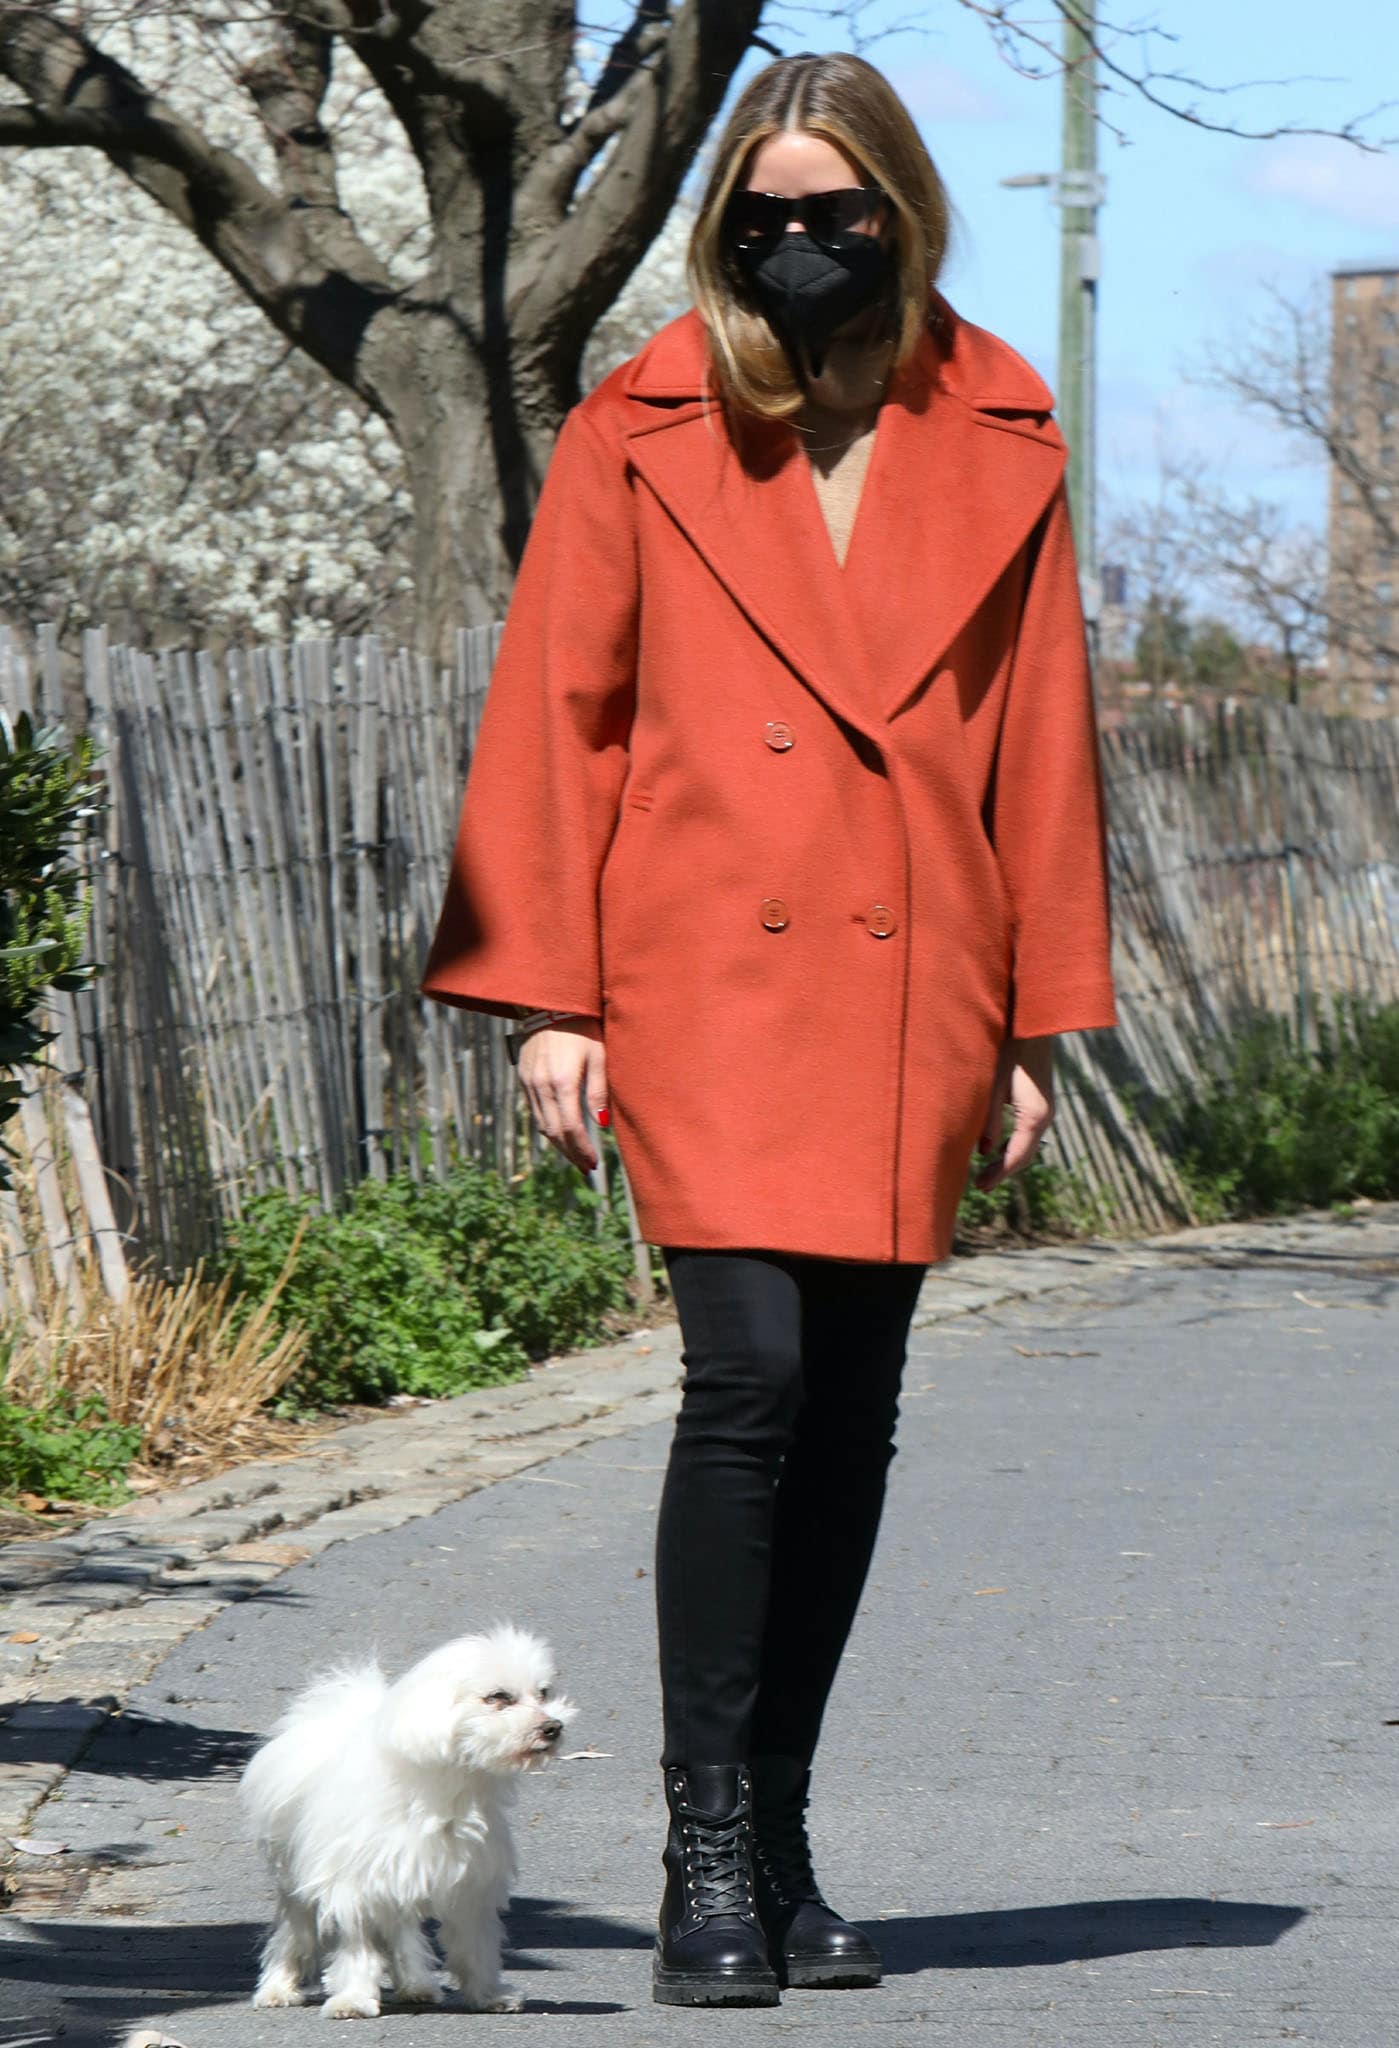 Olivia Palermo enjoys some fresh air with Mr. Butler in New York City on April 13, 2021